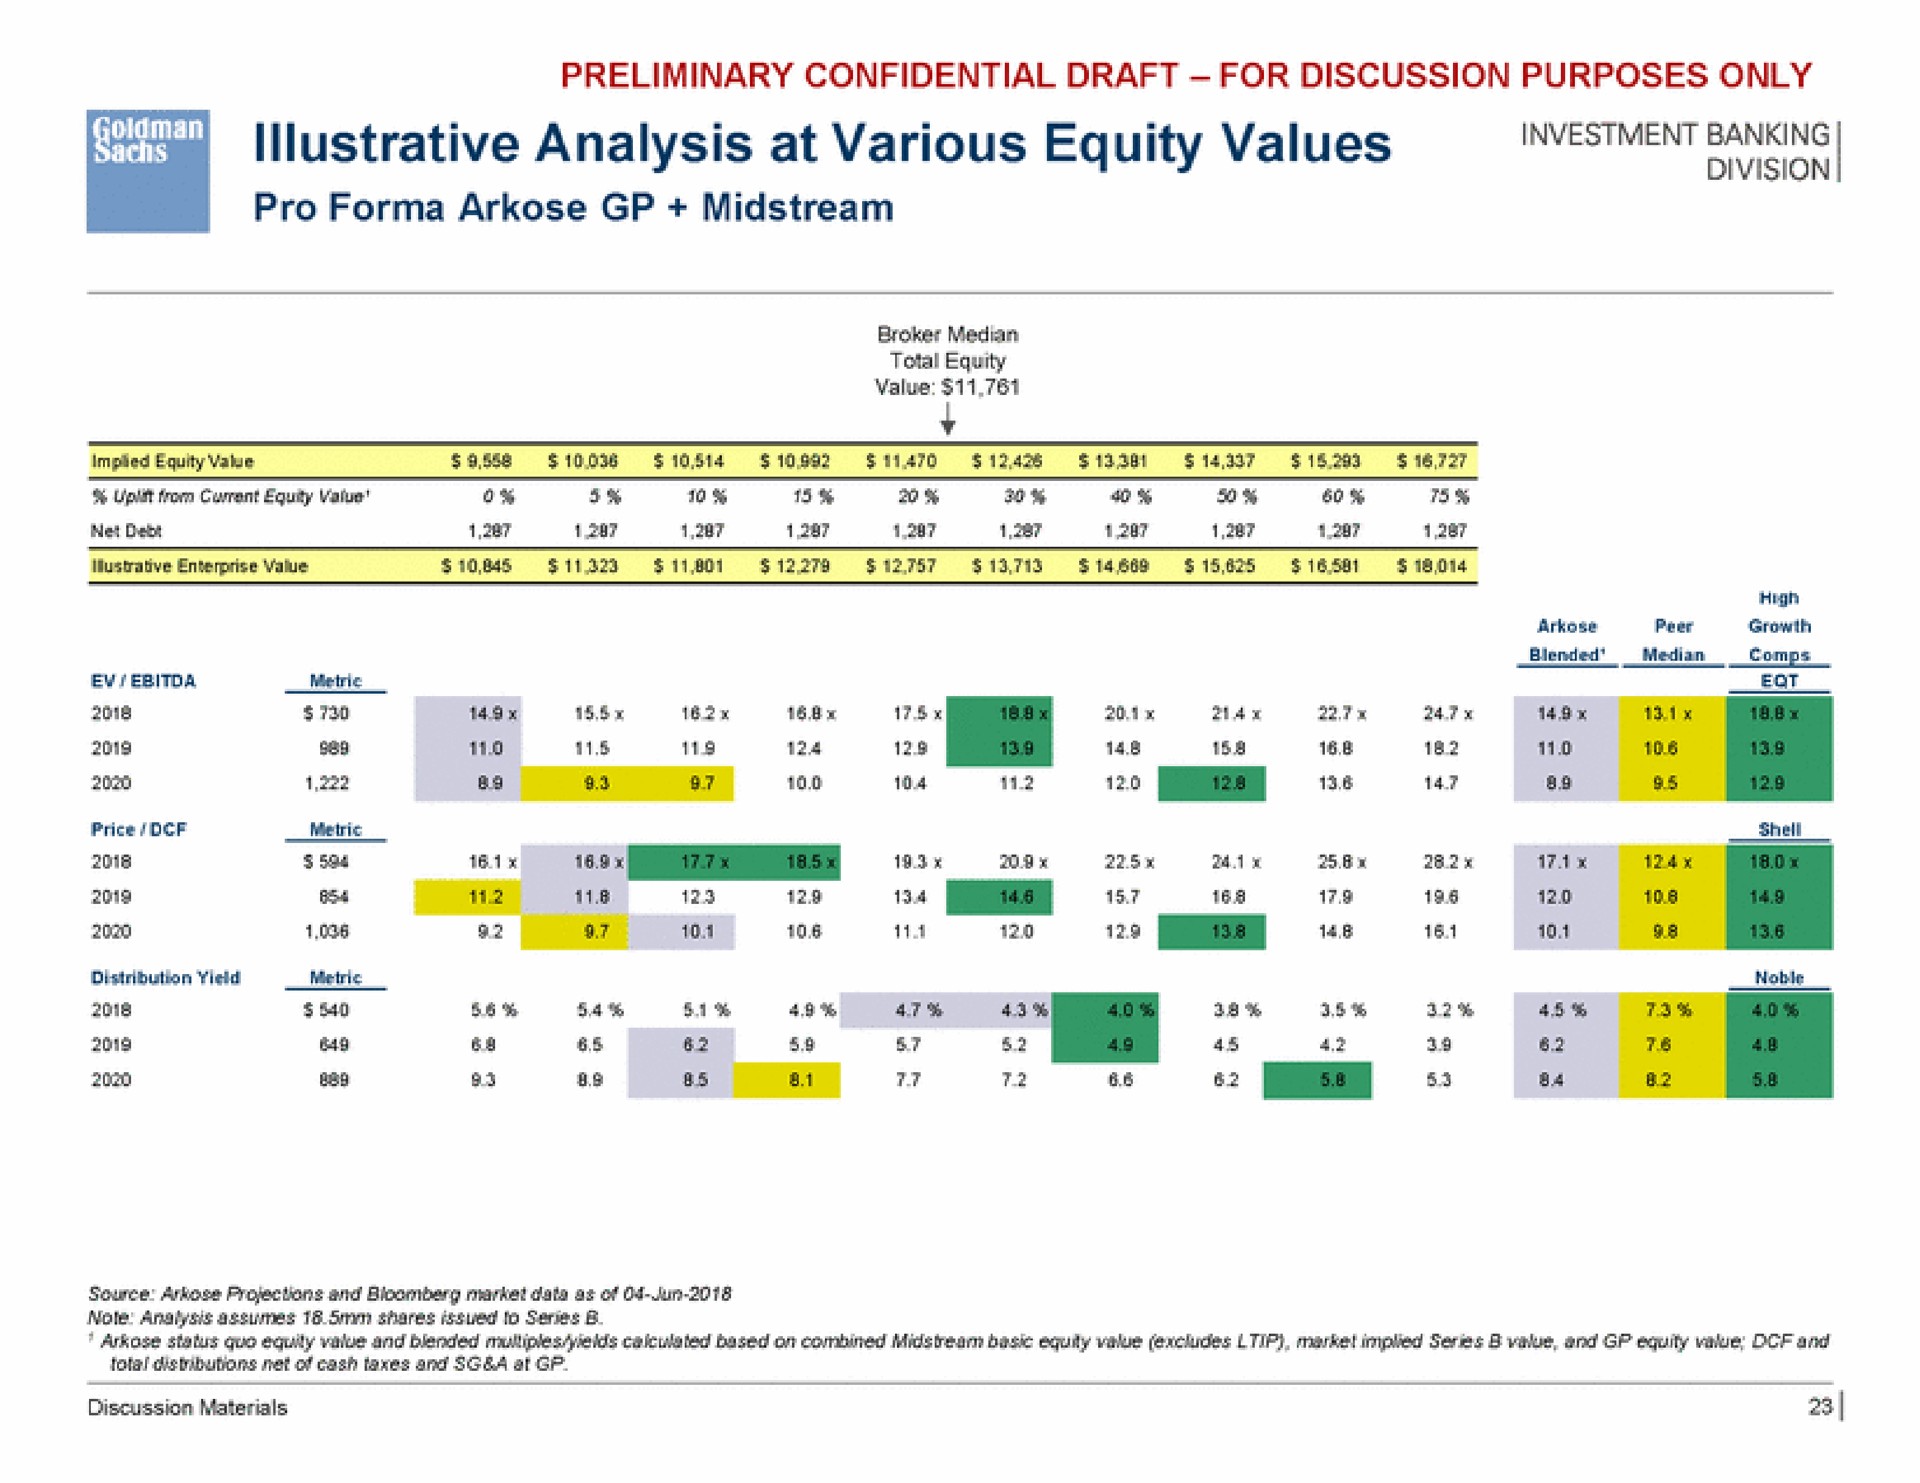 illustrative analysis at various equity values pro arkose midstream division | Goldman Sachs